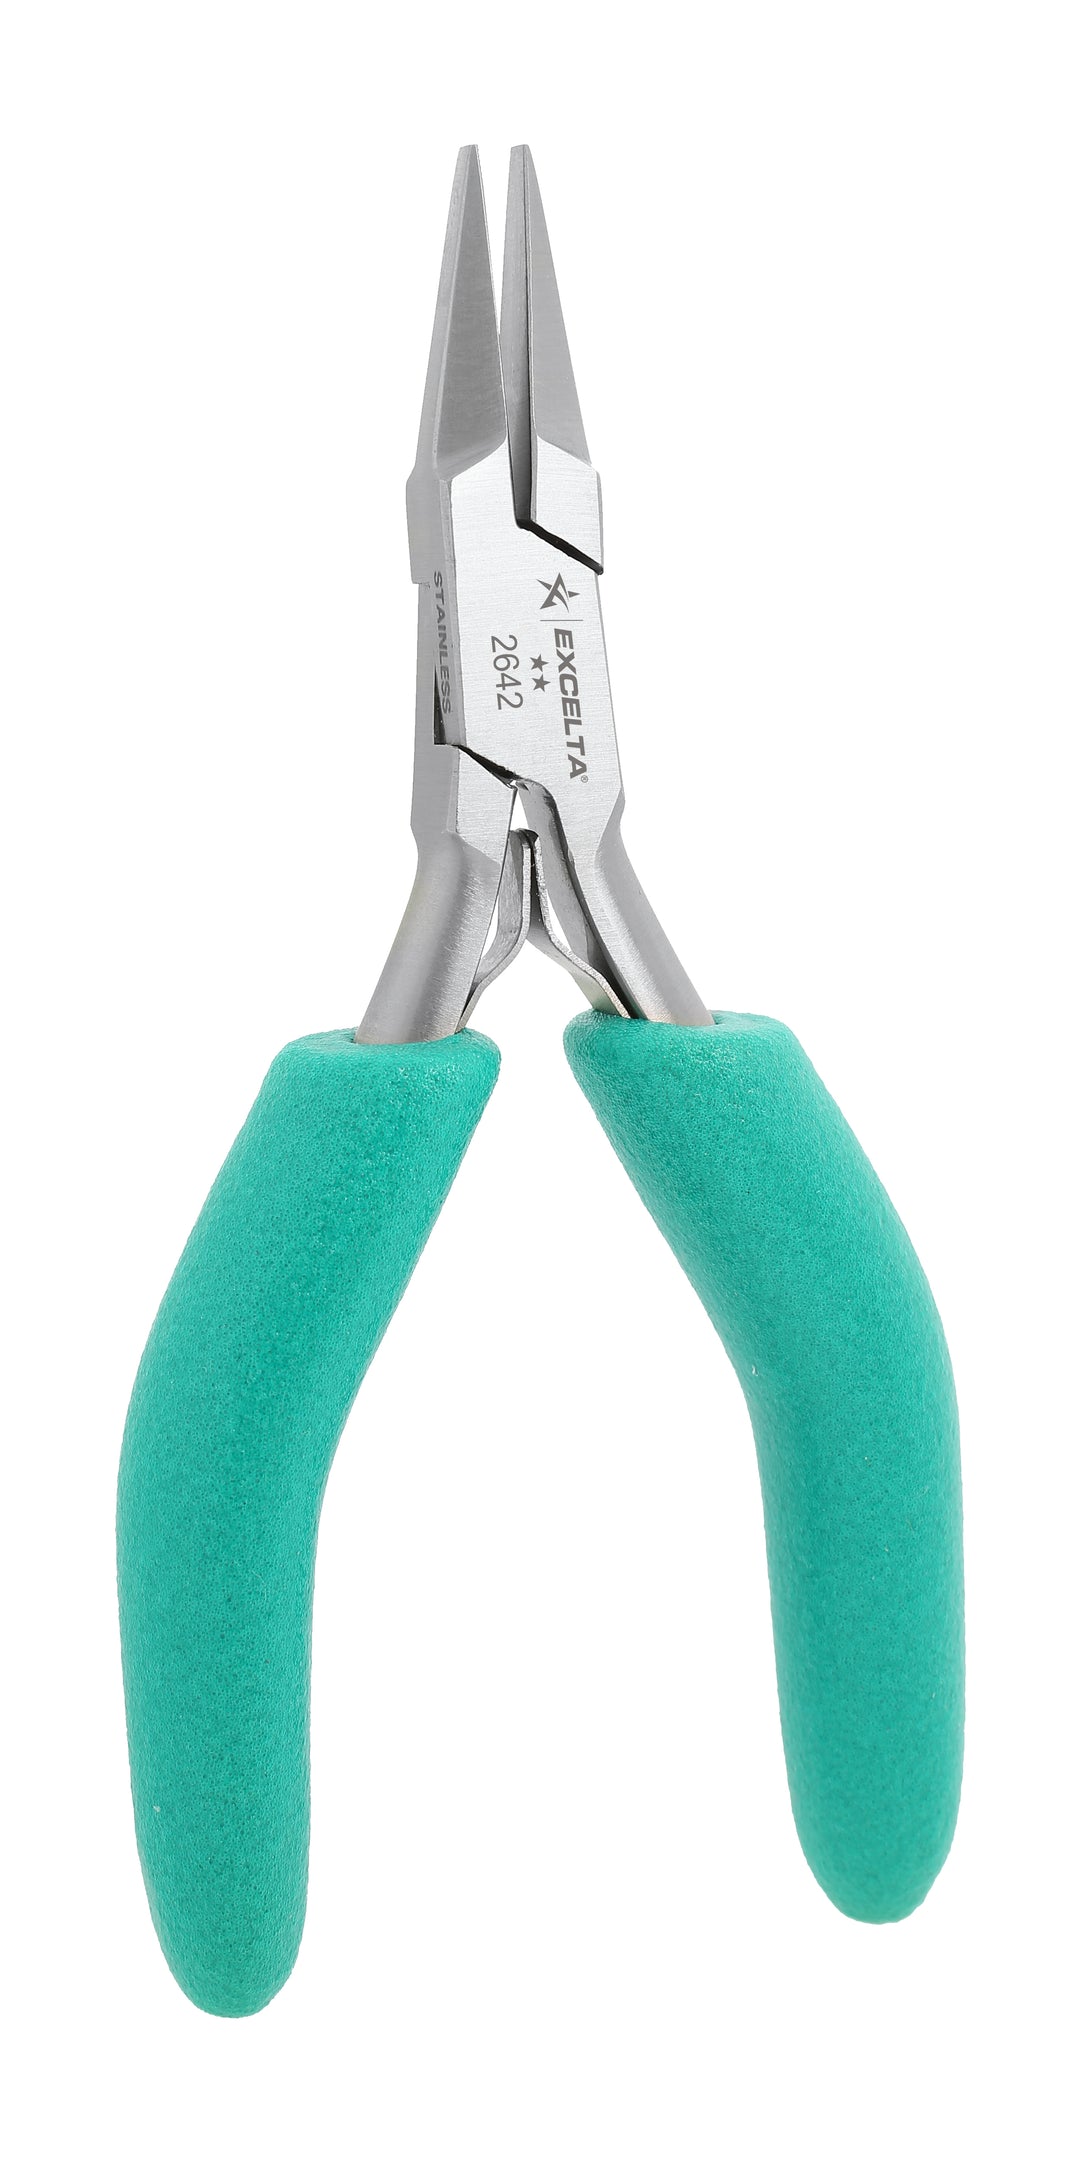 Excelta 2642 Pliers - 2 Star Small Flat Nose - SS